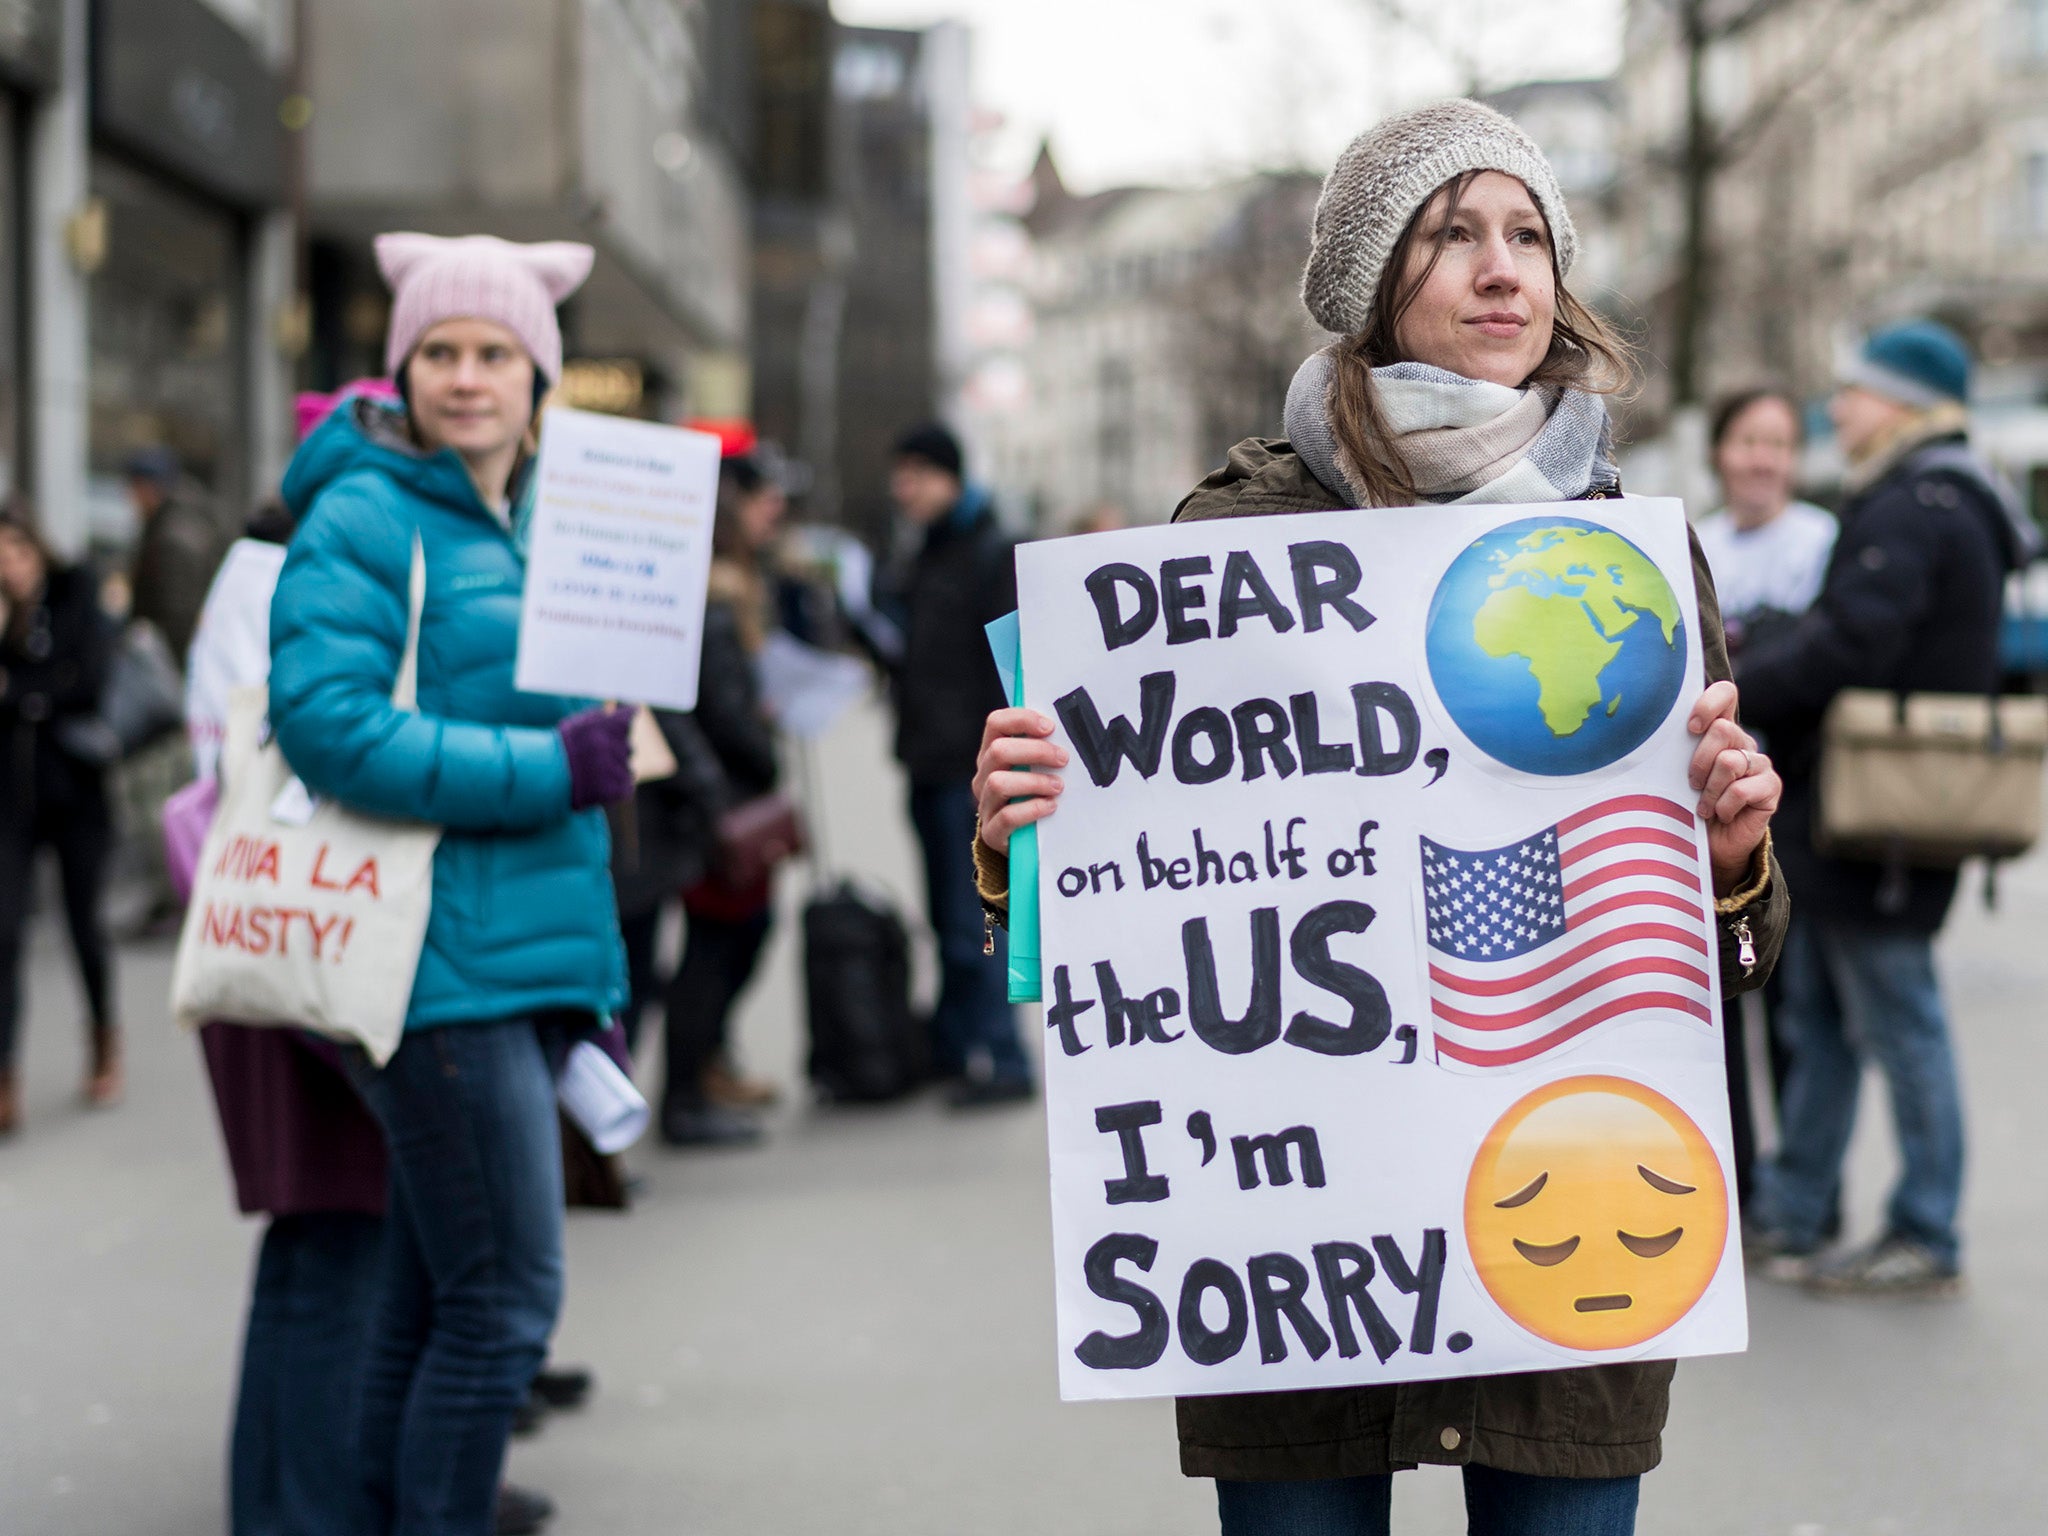 Marches are happening all over the world, including this one in Zurich, Switzerland